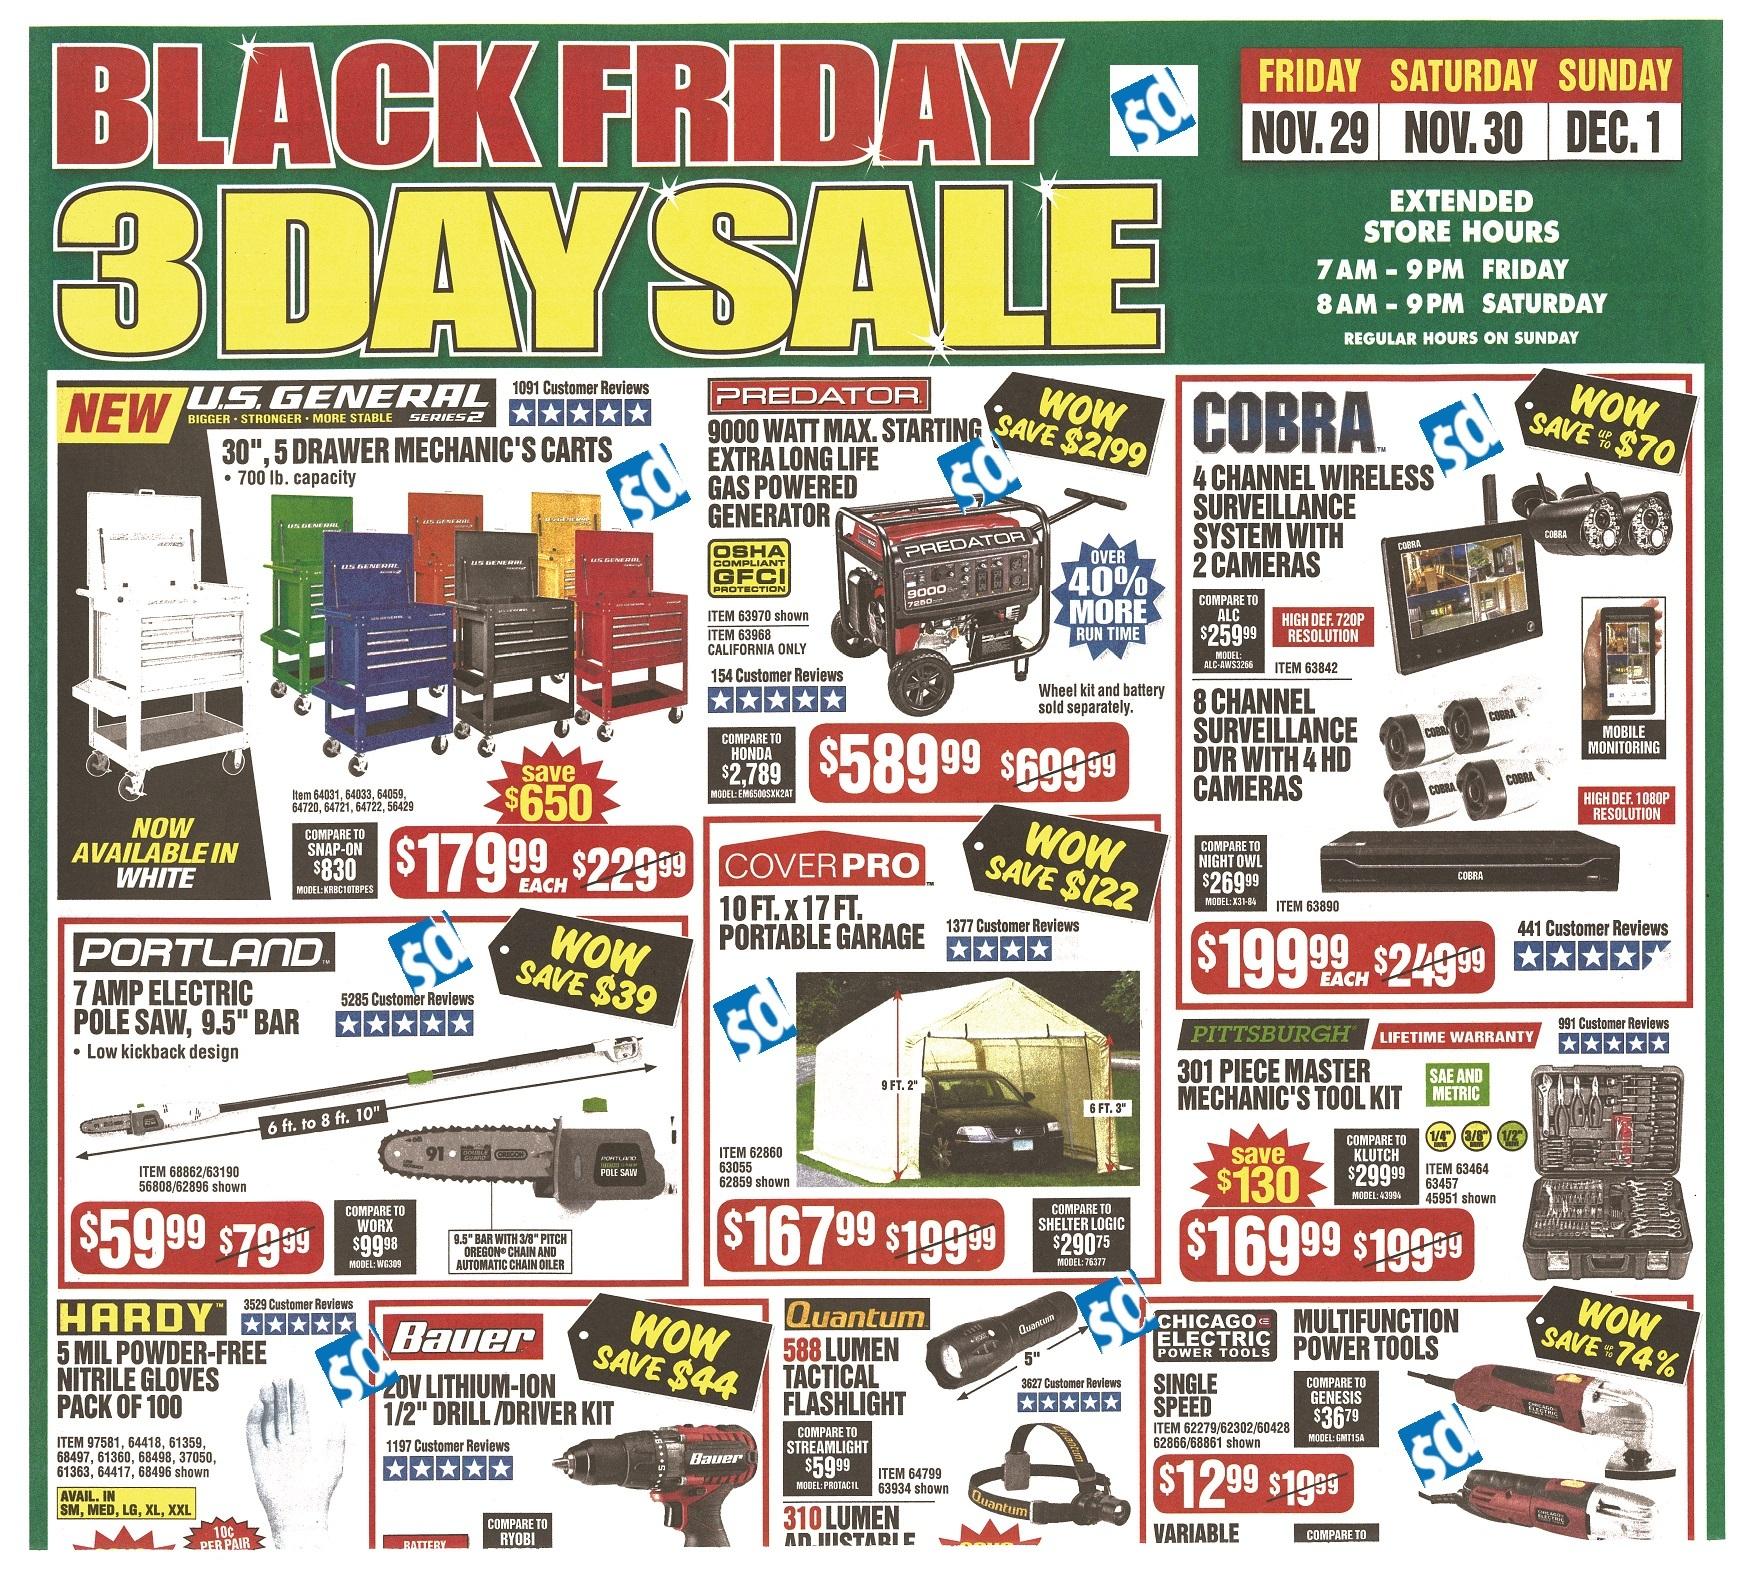 Harbor Freight Tools Black Friday Ad 2019 - Sale Live Now - What Stores Have Black Friday Deals.all Day